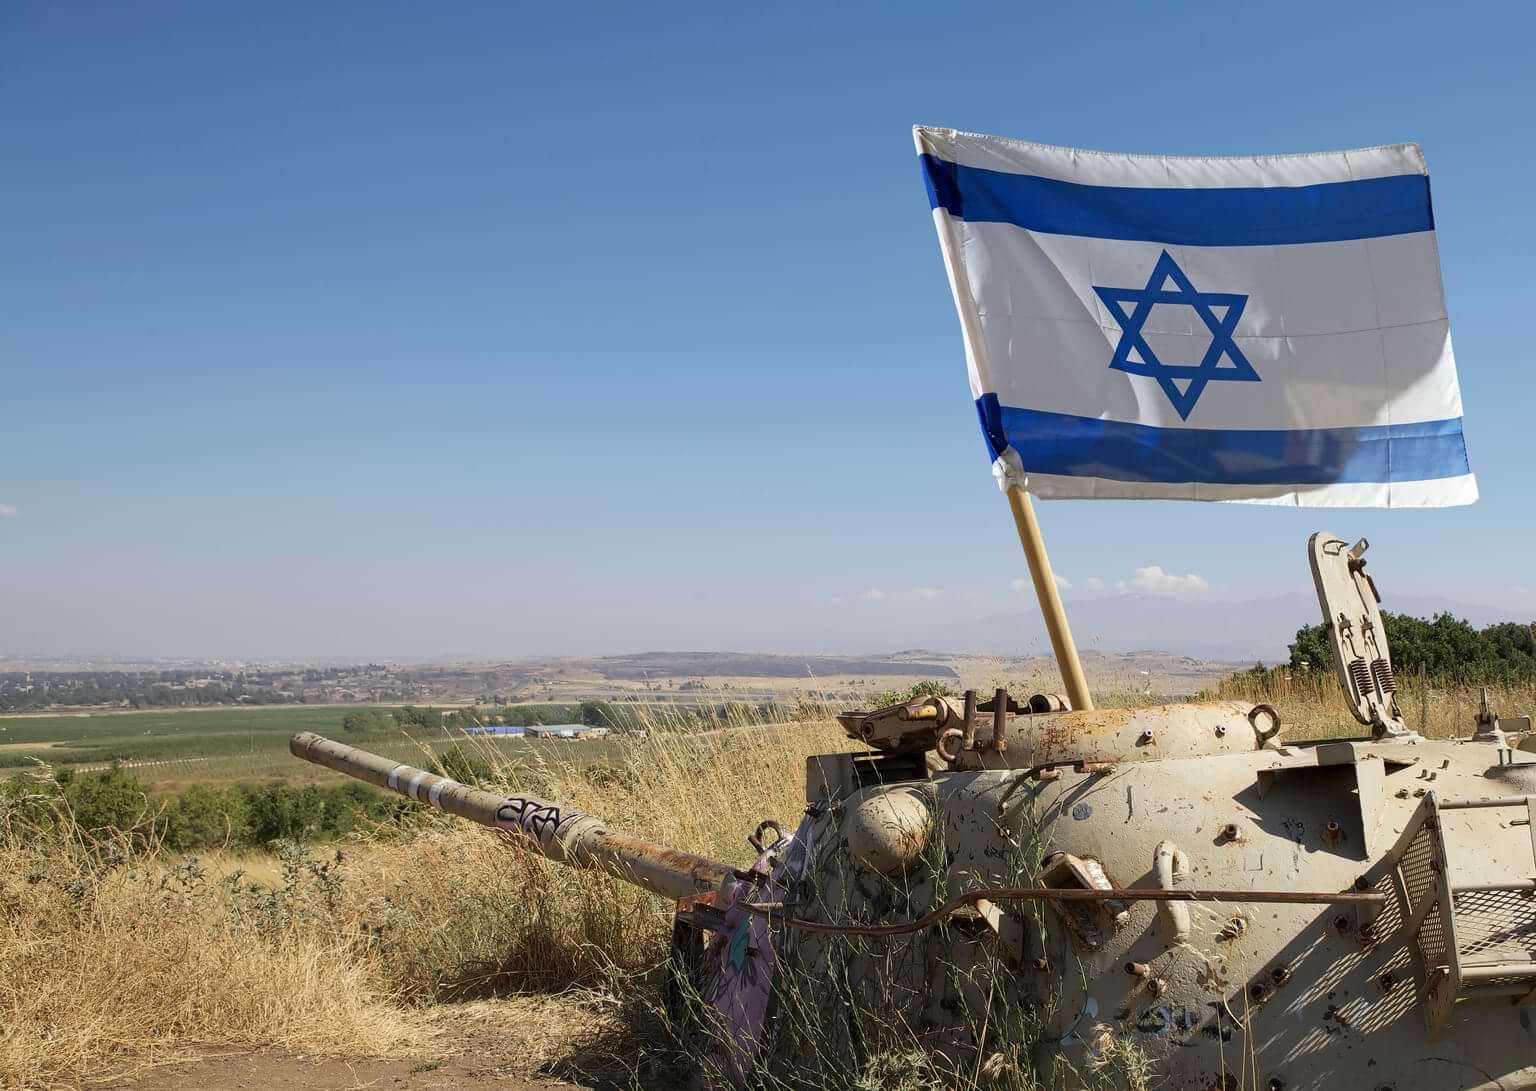 An Israeli tank sits in a field with an Israel flag upright within the tank. By Maurizio/stock.adobe.com